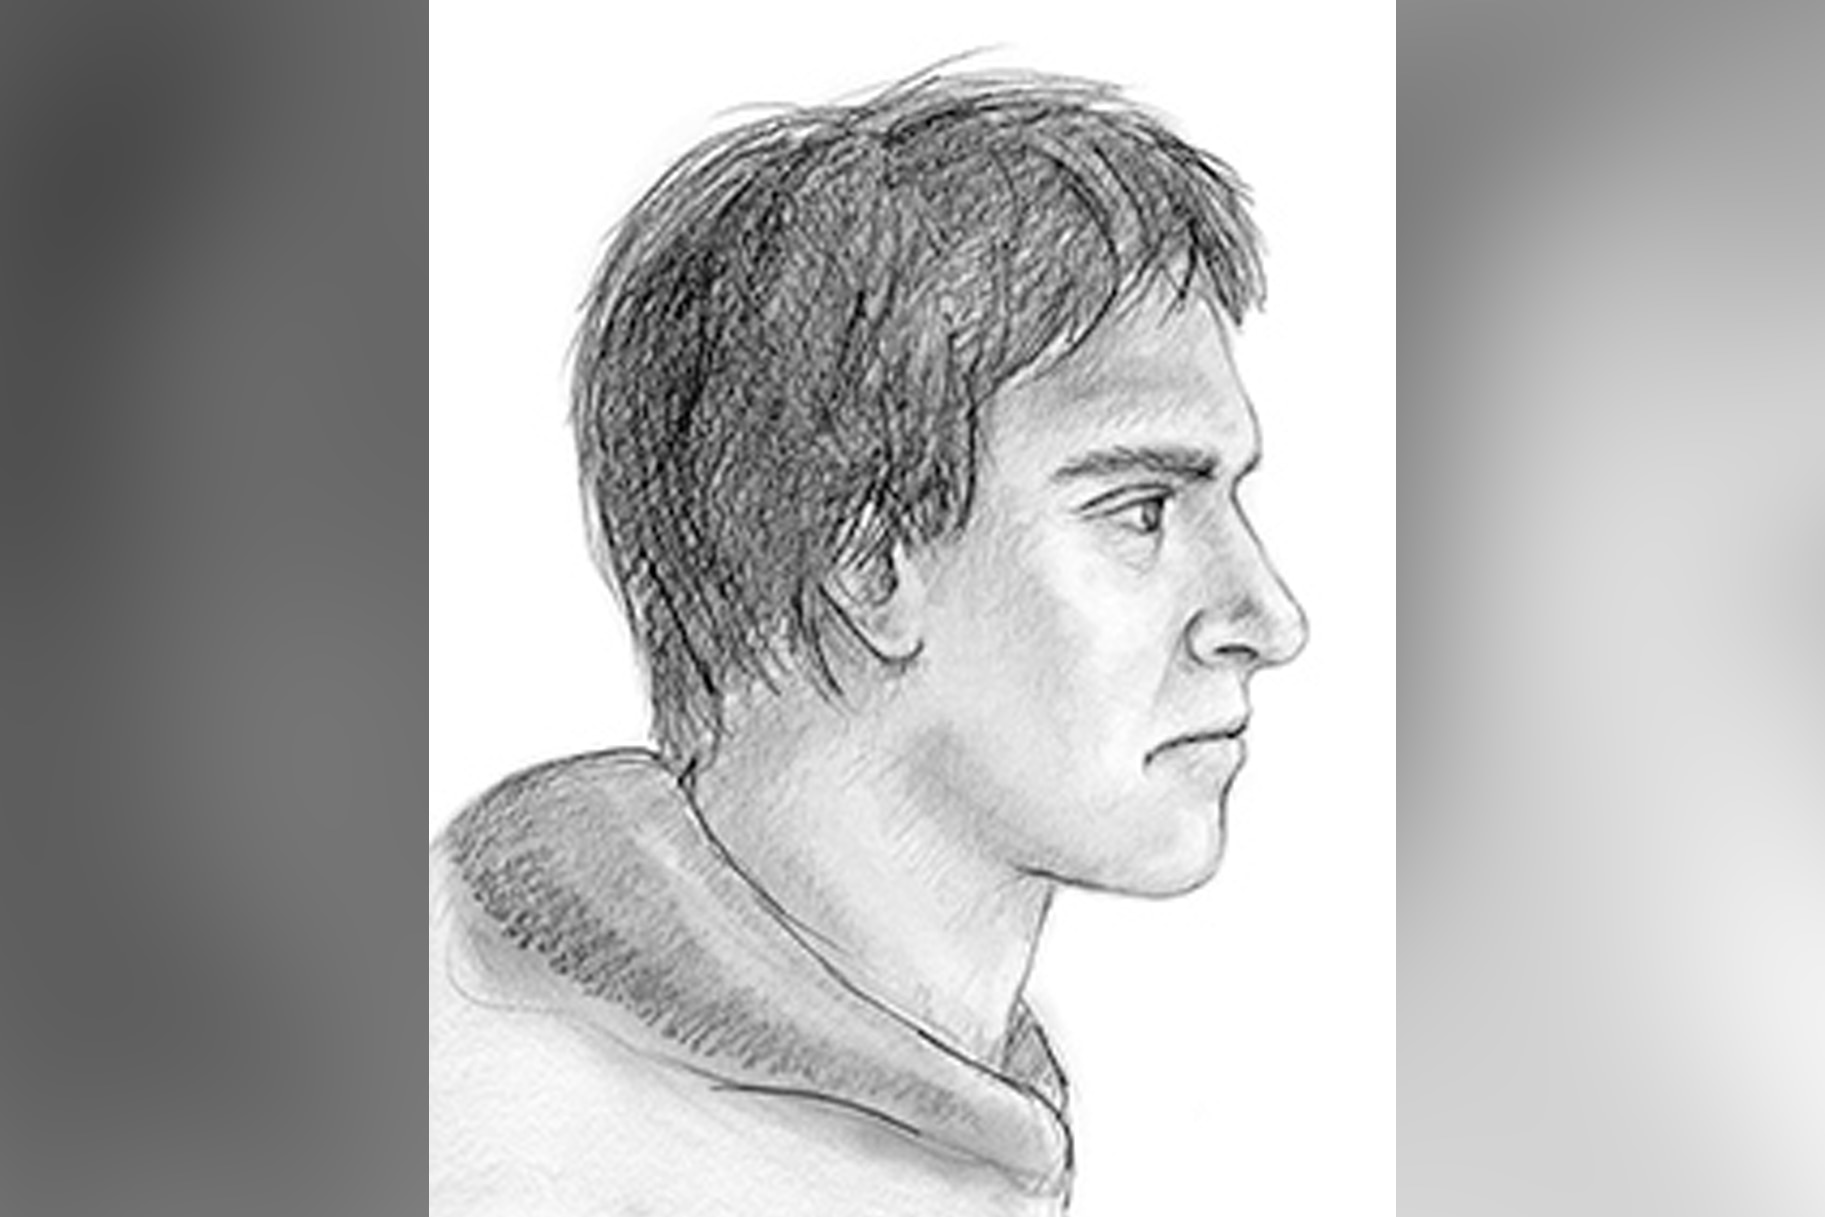 A sketch of the person of interest in the Stephen and Djeswende Reid homicides.